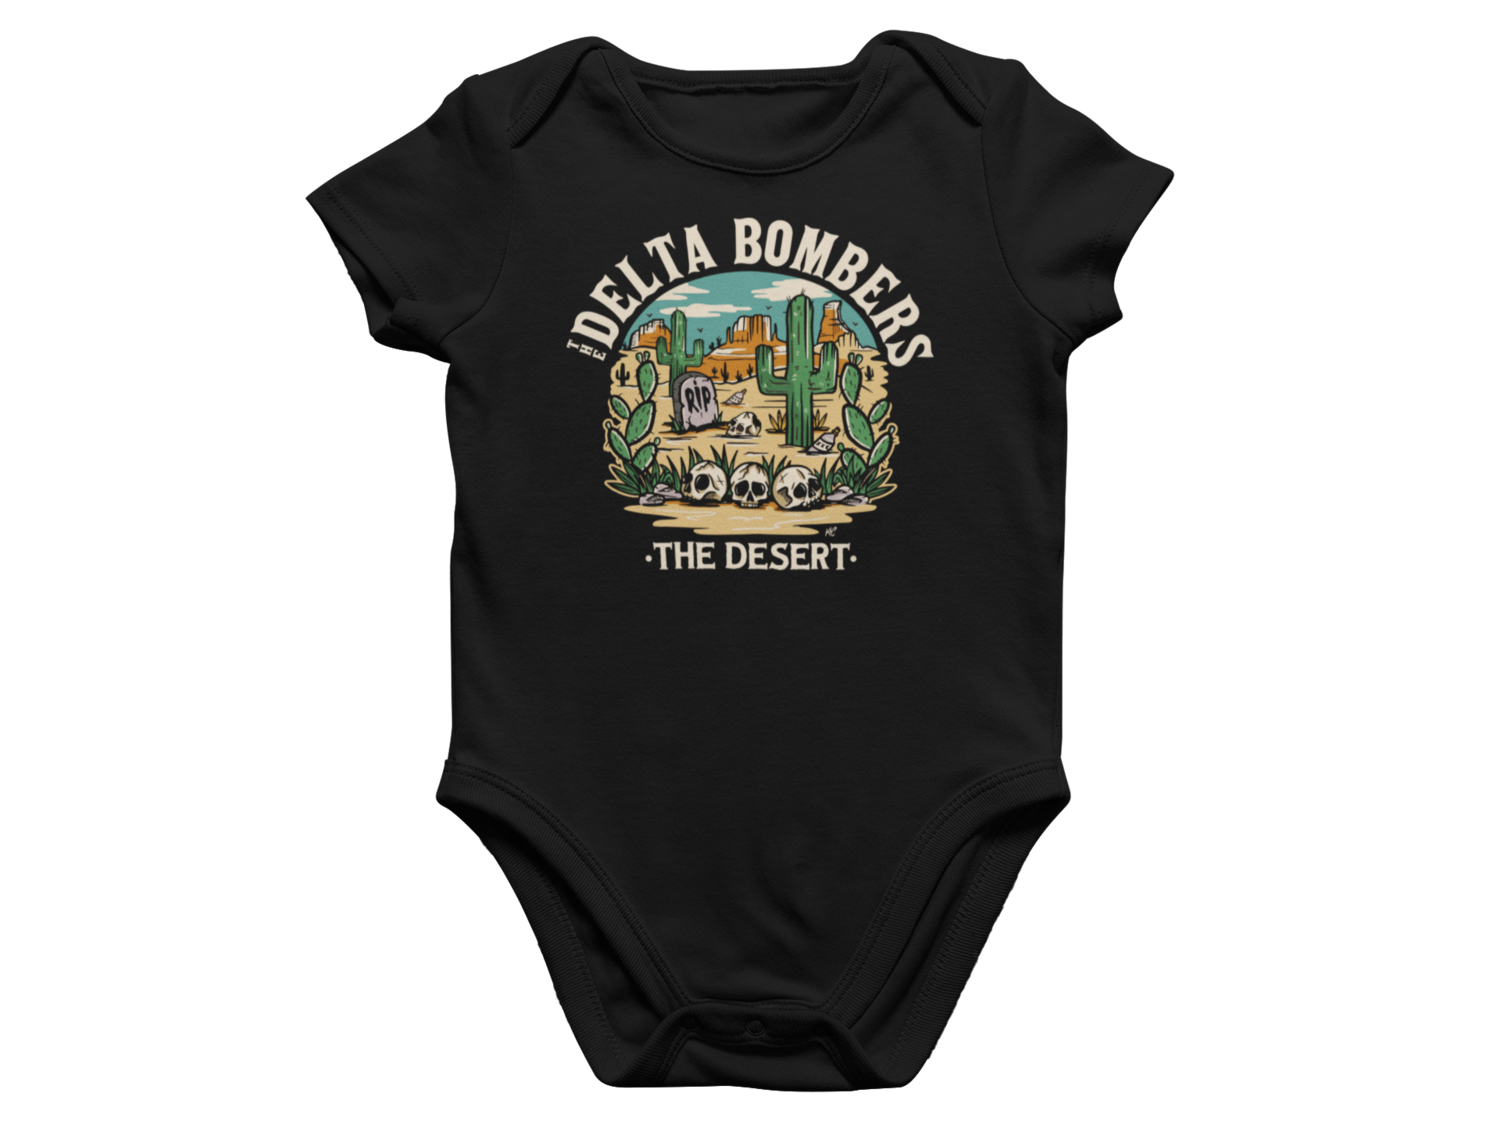 THE DELTA BOMBERS "The desert" BABY ONIESE